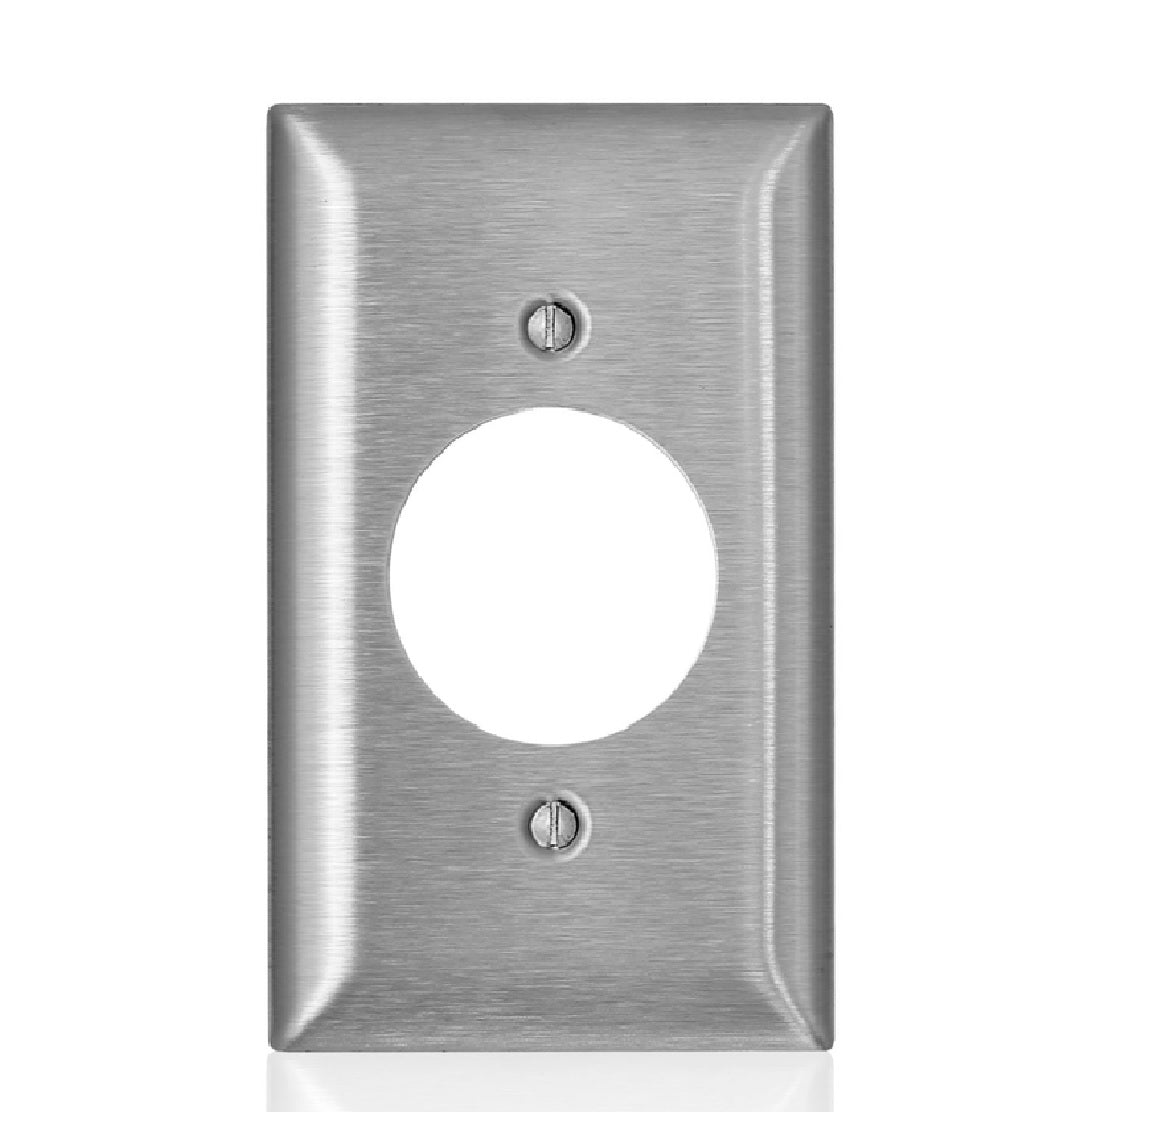 Leviton SL721-000 C-Series Receptacle Rectangle Wall Plate